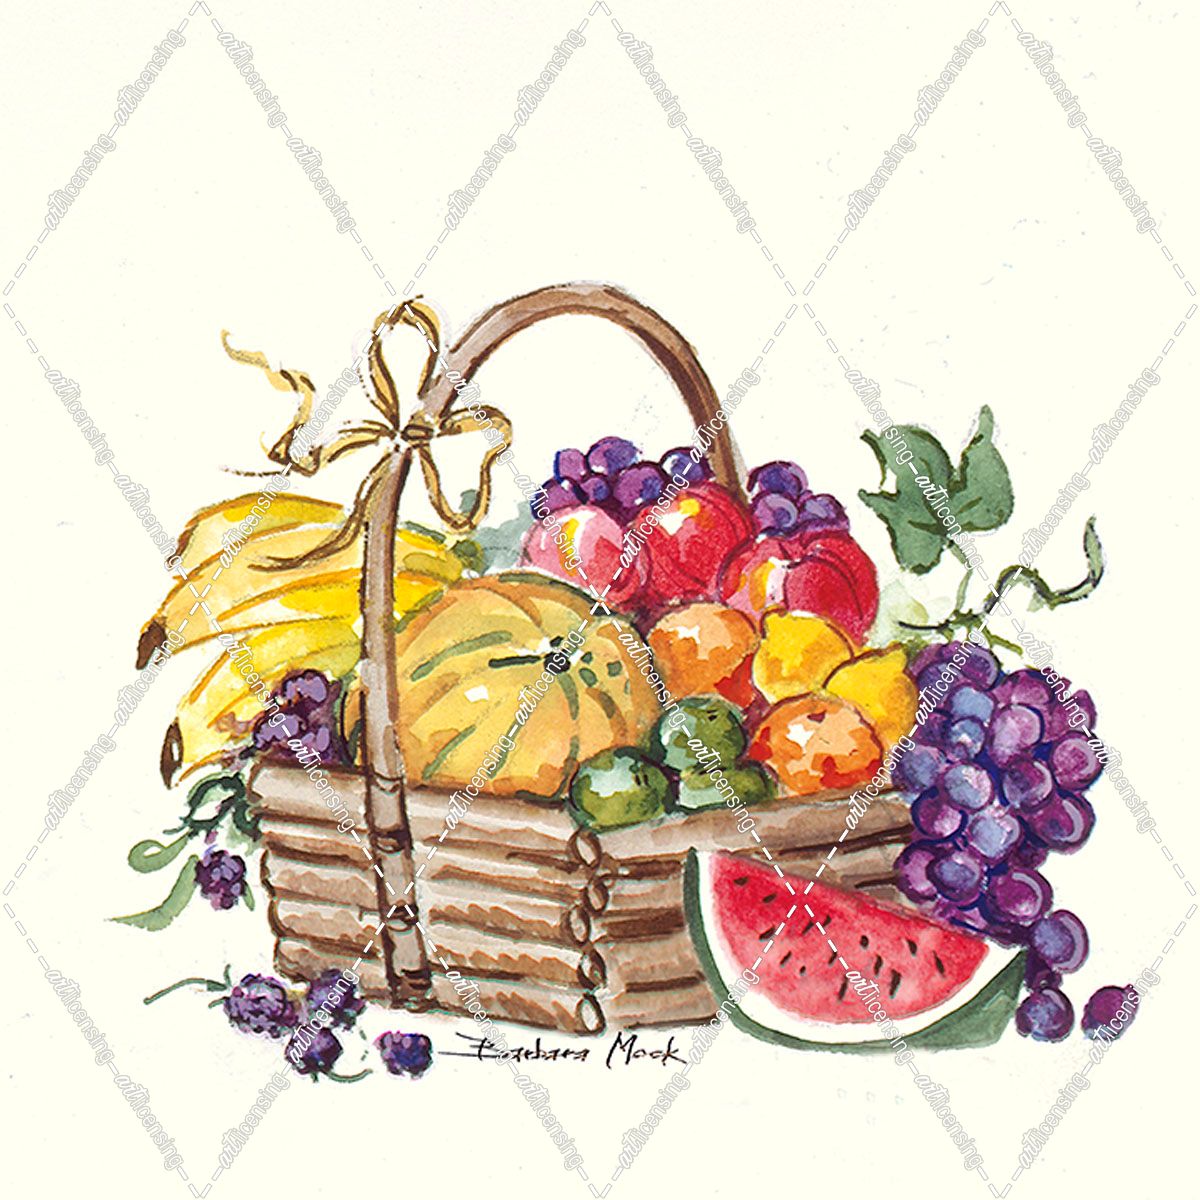 601 Watermelon and Fruit Basket